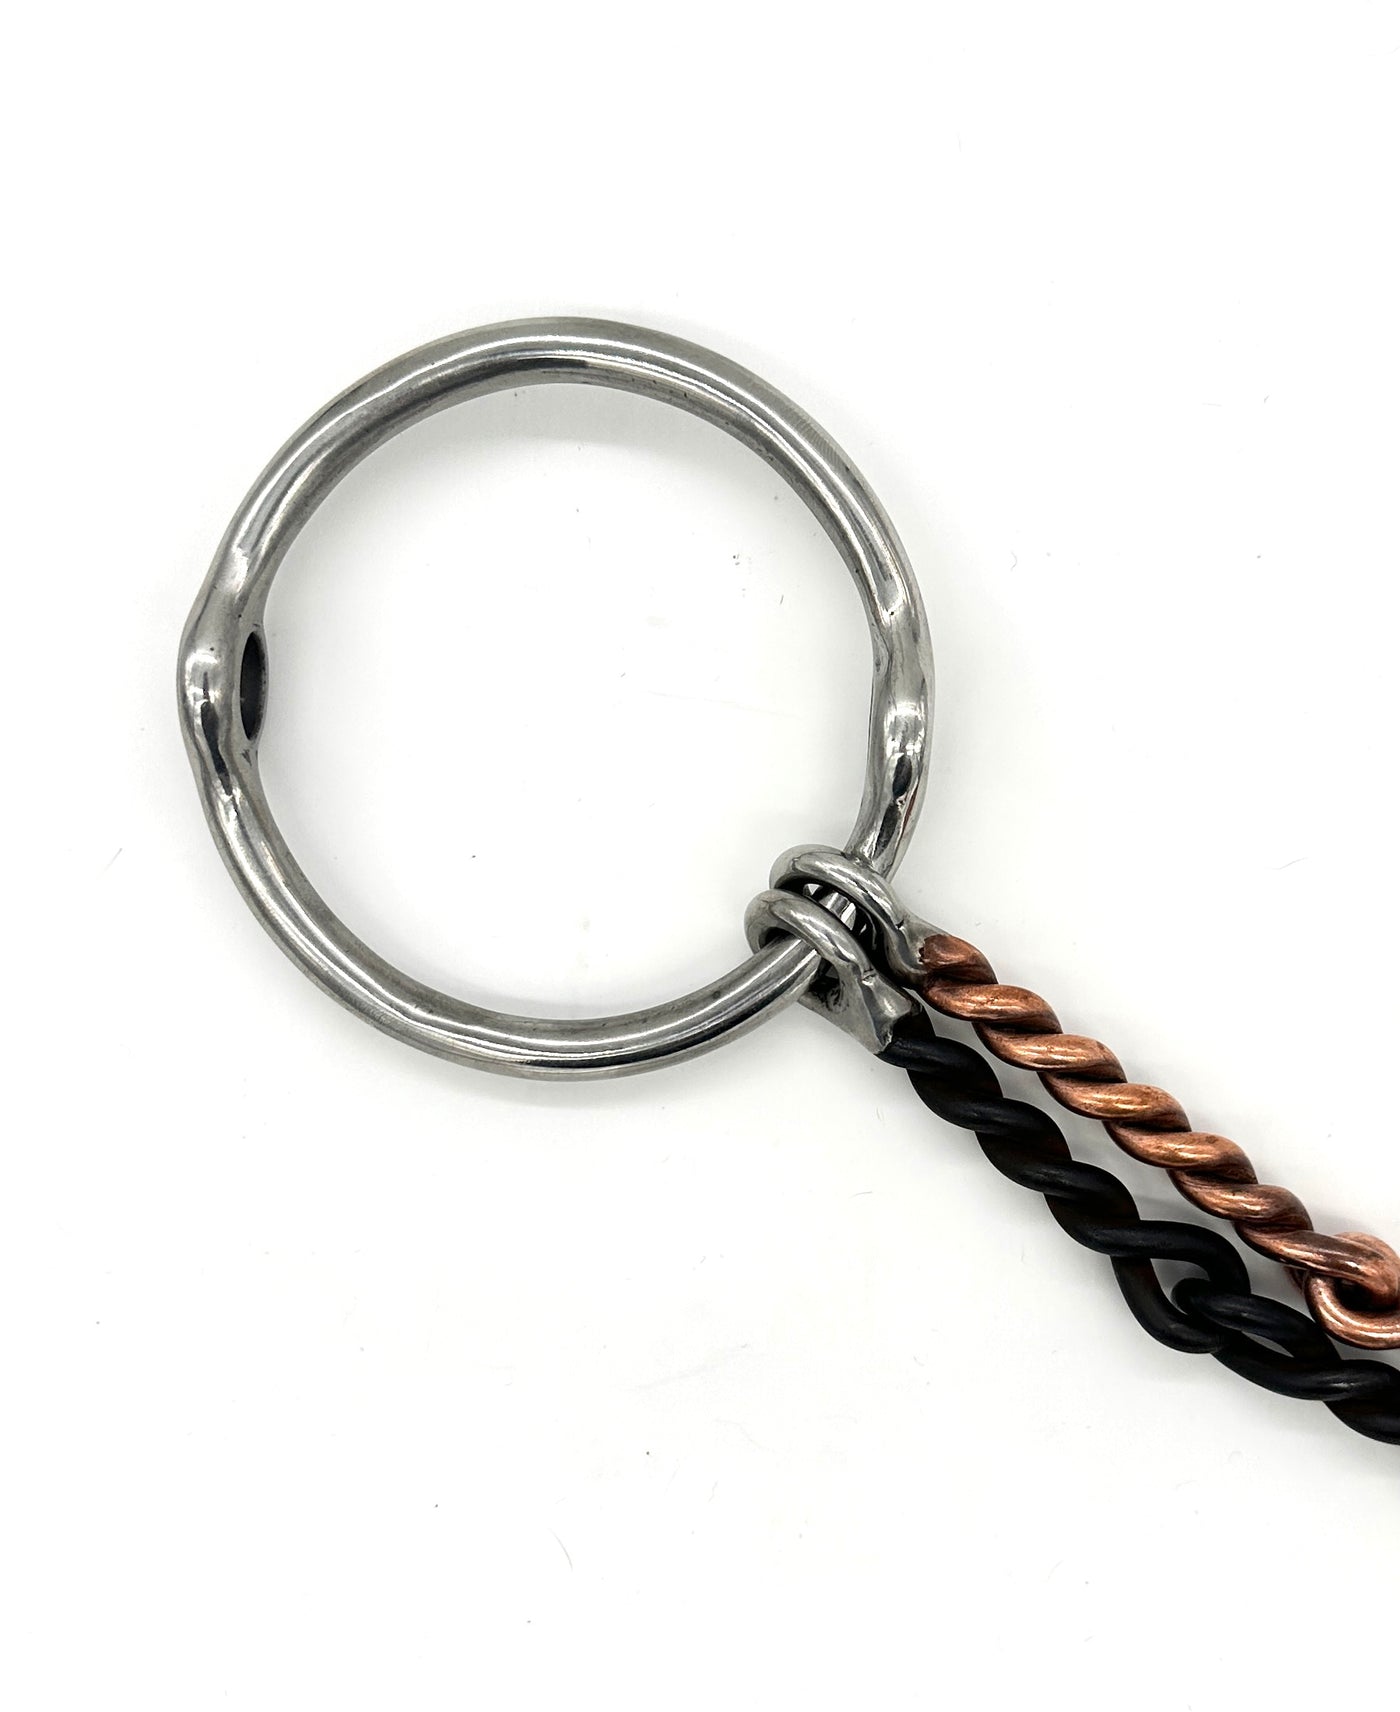 Sweet Iron and Copper Double Wire Balding Gag Bit